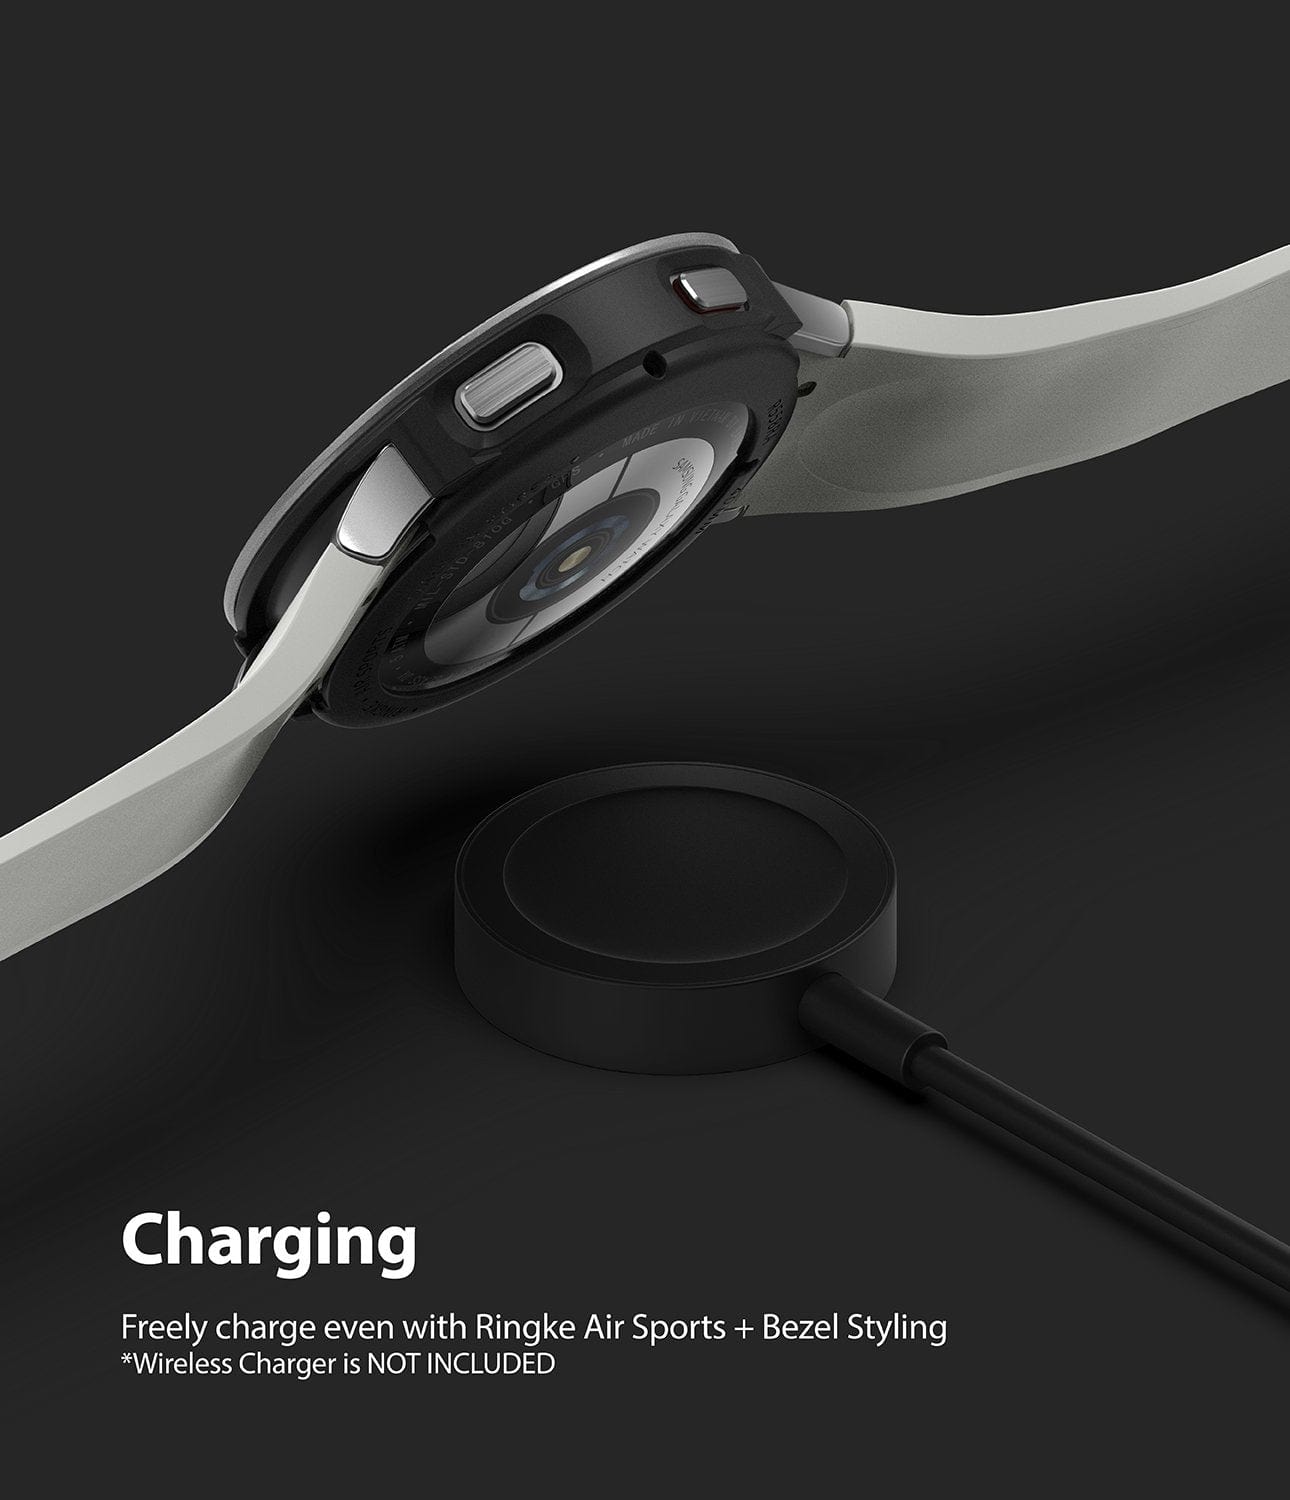 Experience the convenience of wireless power share and charging without the need to remove the case